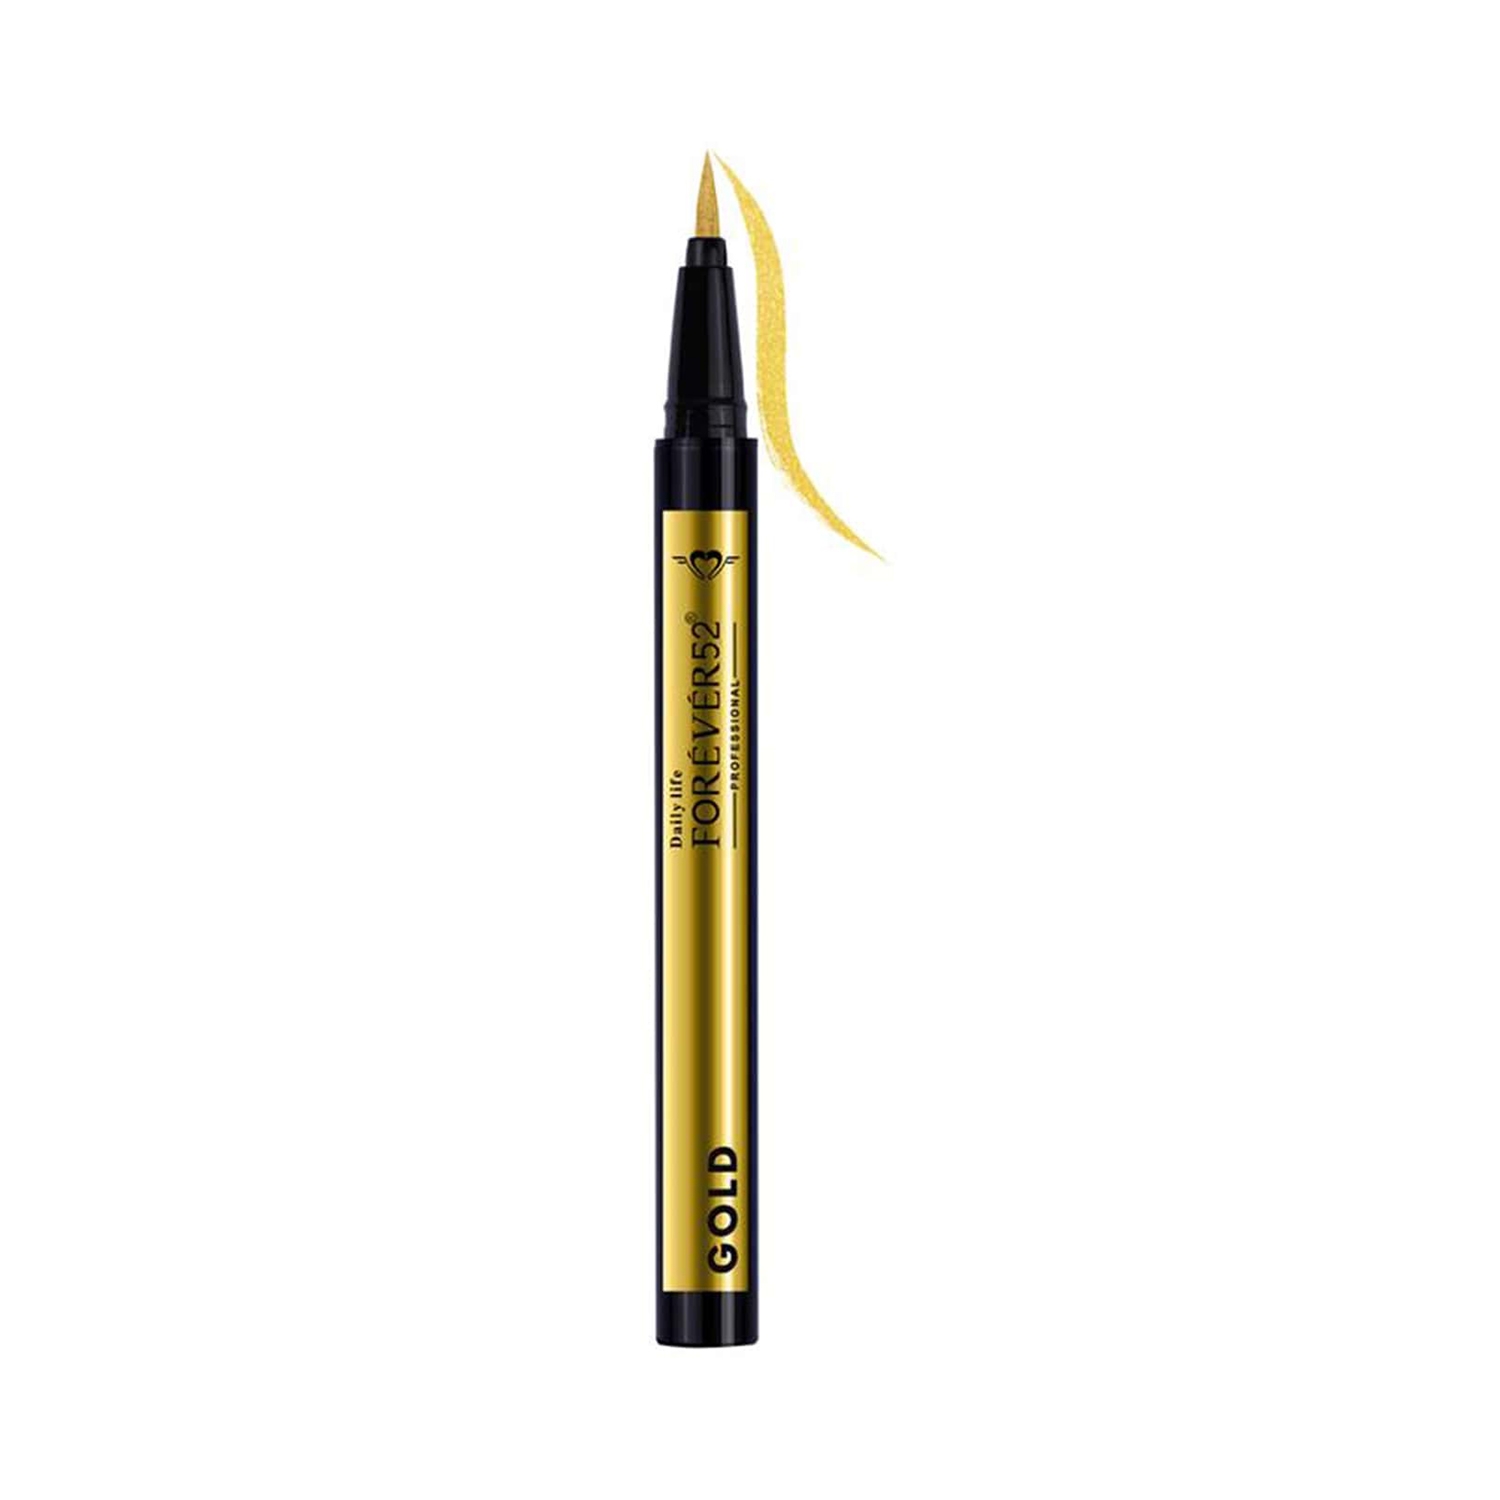 Daily Life Forever52 | Daily Life Forever52 Glitz Waterproof Eyeliner Eyeshadow - Gold (0.6g)